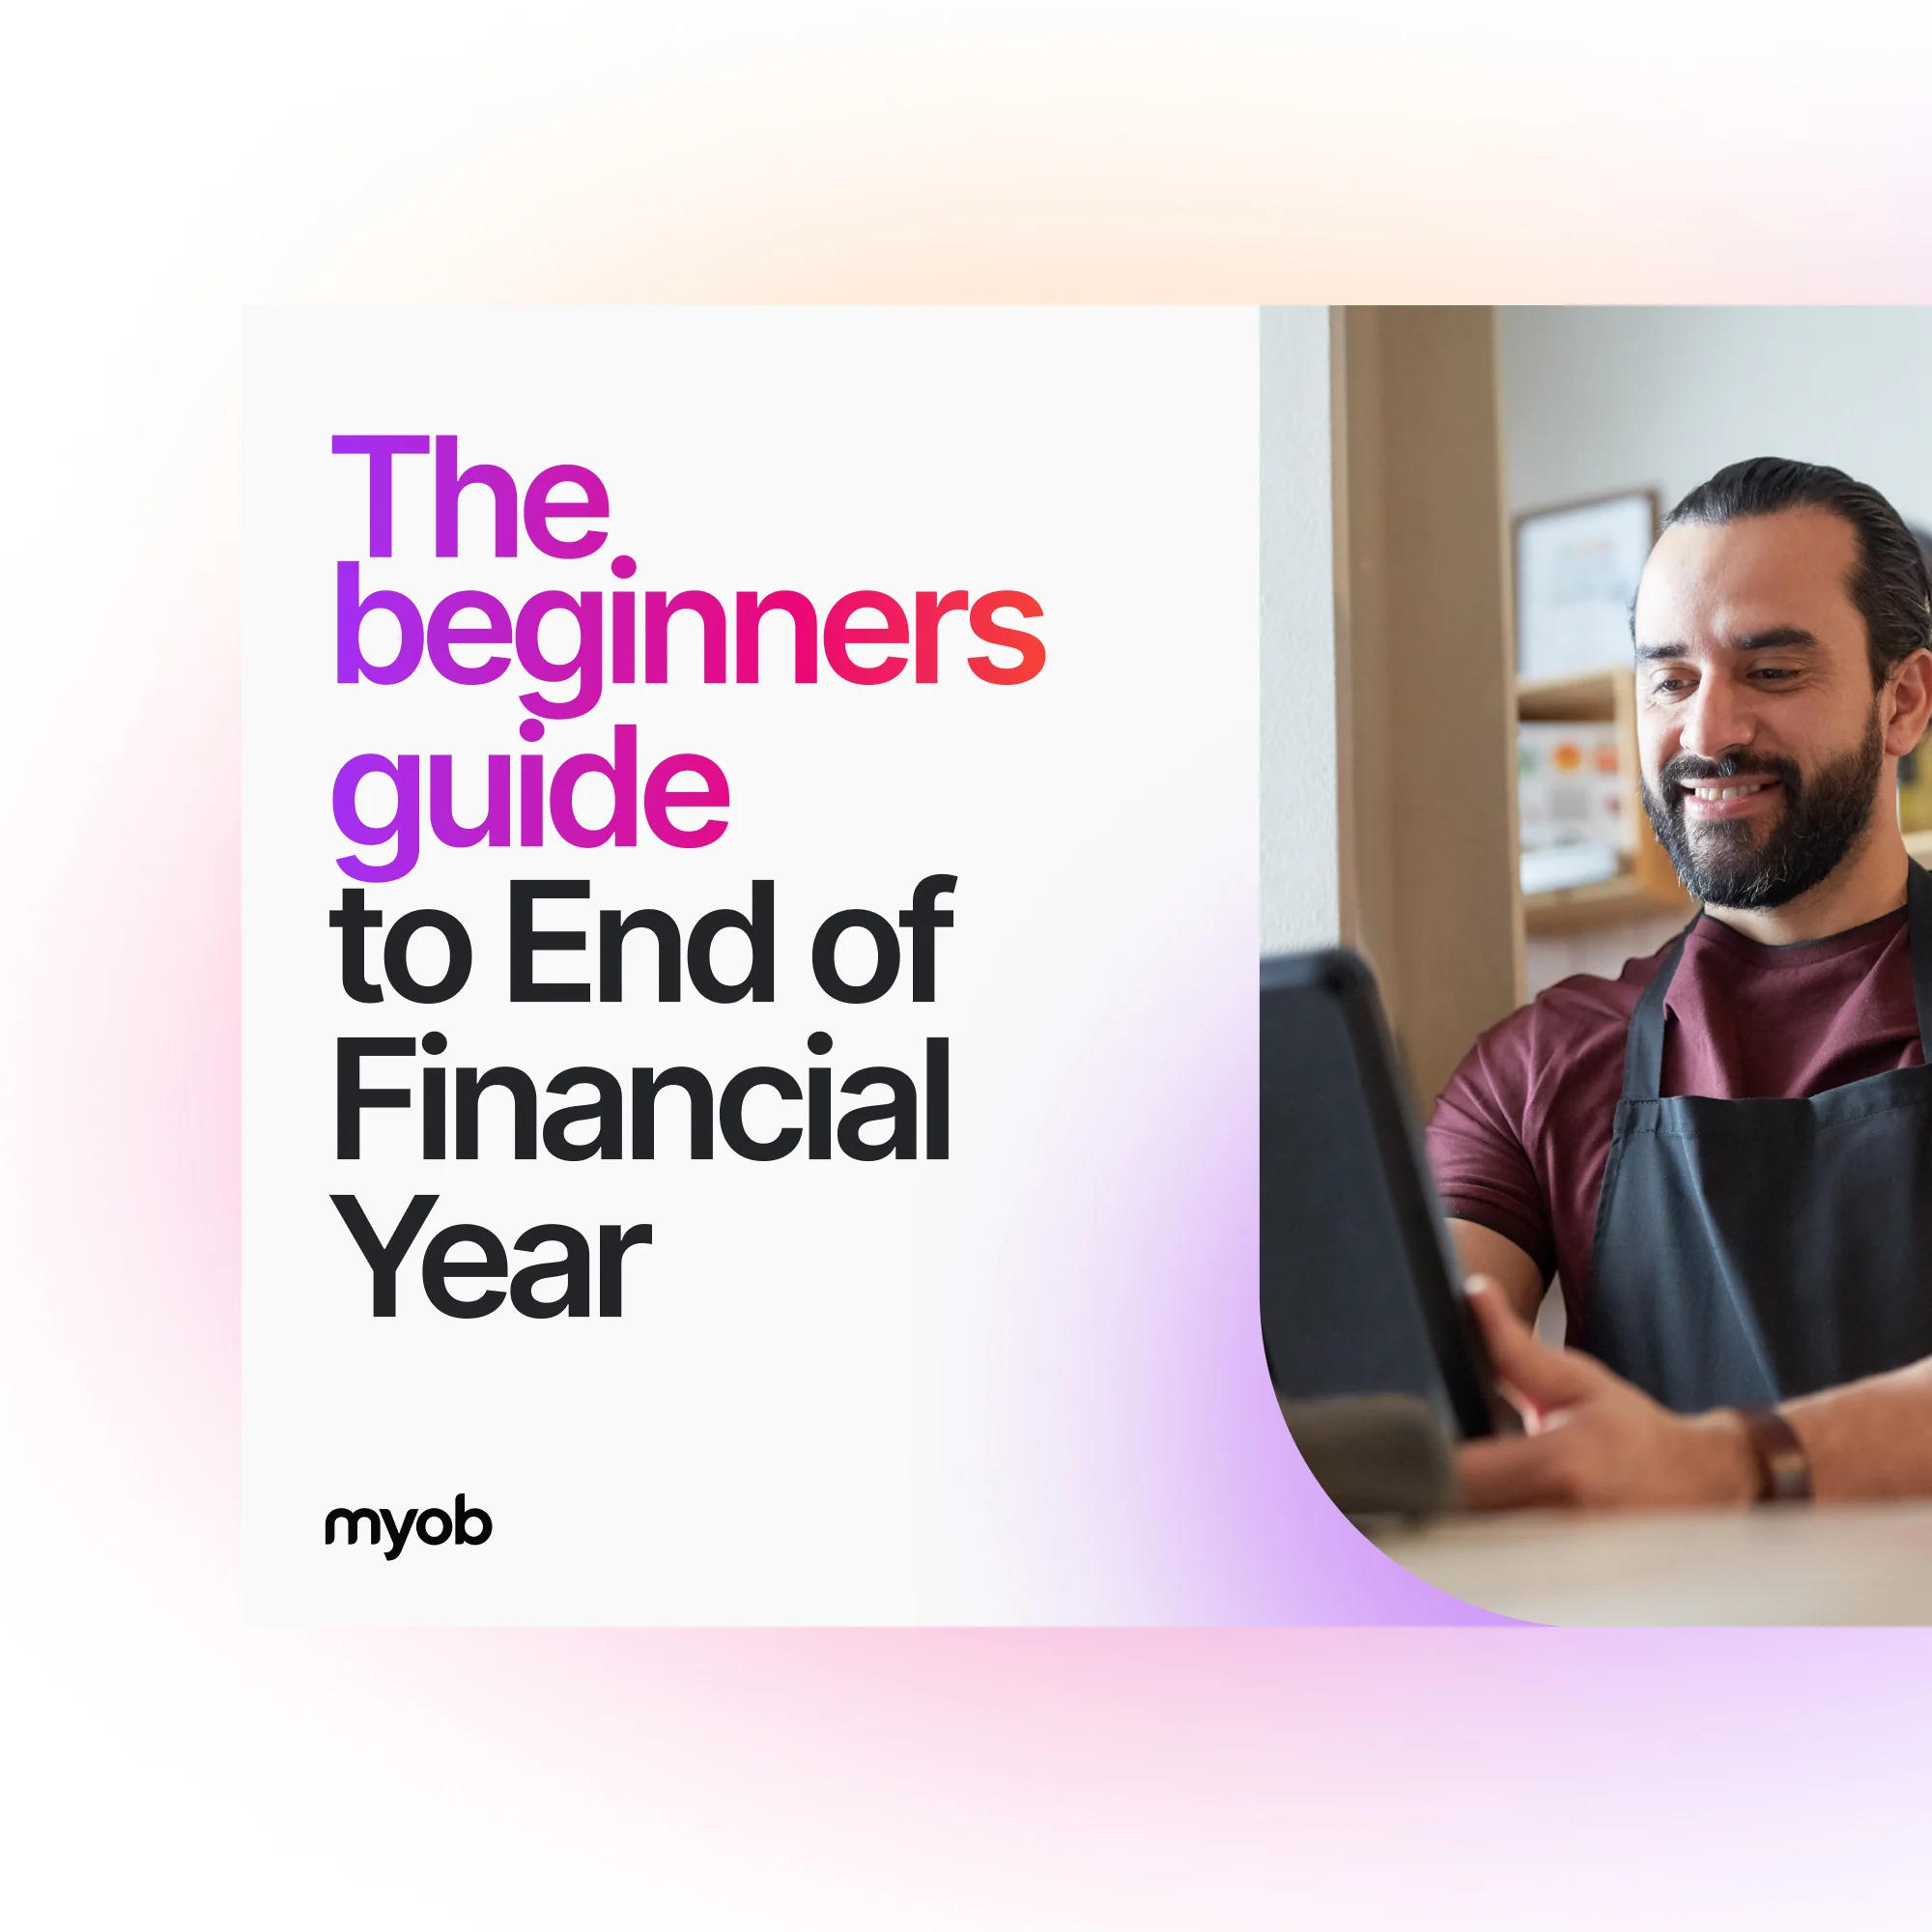 Man at laptop and text "The beginners guide to end of financial year"